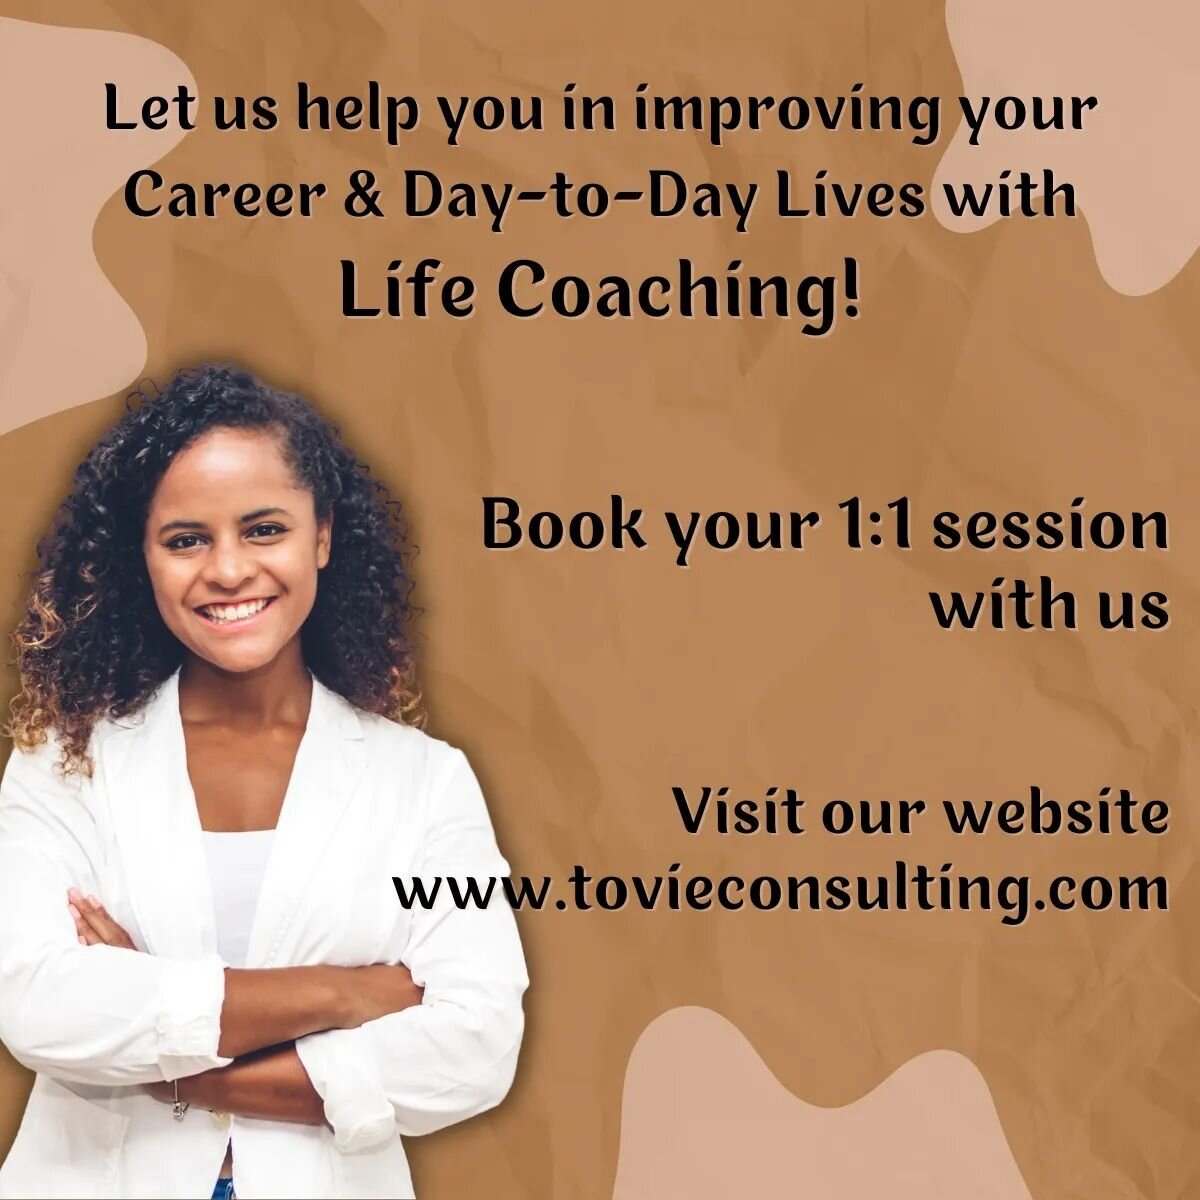 Hello Everyone! ☺

Make your lives and careers better with us with the help of Life Coaching Sessions! ✅️

Book your 1:1 seat with us TODAY! 👇
www.tovieconsulting.com
✨️ LINK IN BIO ✨️

.
.
.
#tovieconsulting #tovieconsultingllc #tovieconsultinglife